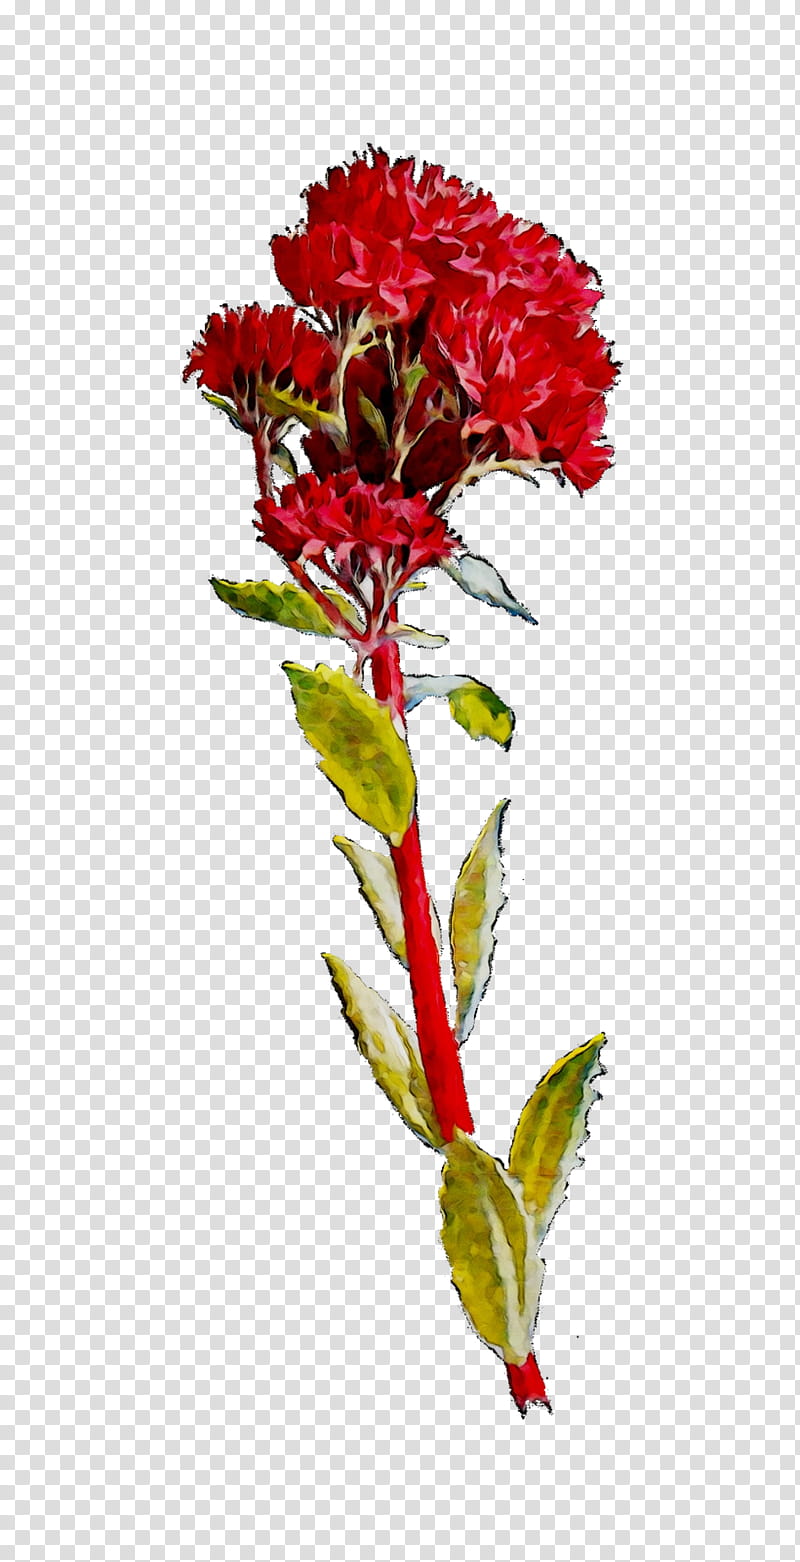 Floral Flower, Carnation, Floral Design, Cut Flowers, Plant Stem, Plants, Red, Prince Of Wales Feathers transparent background PNG clipart